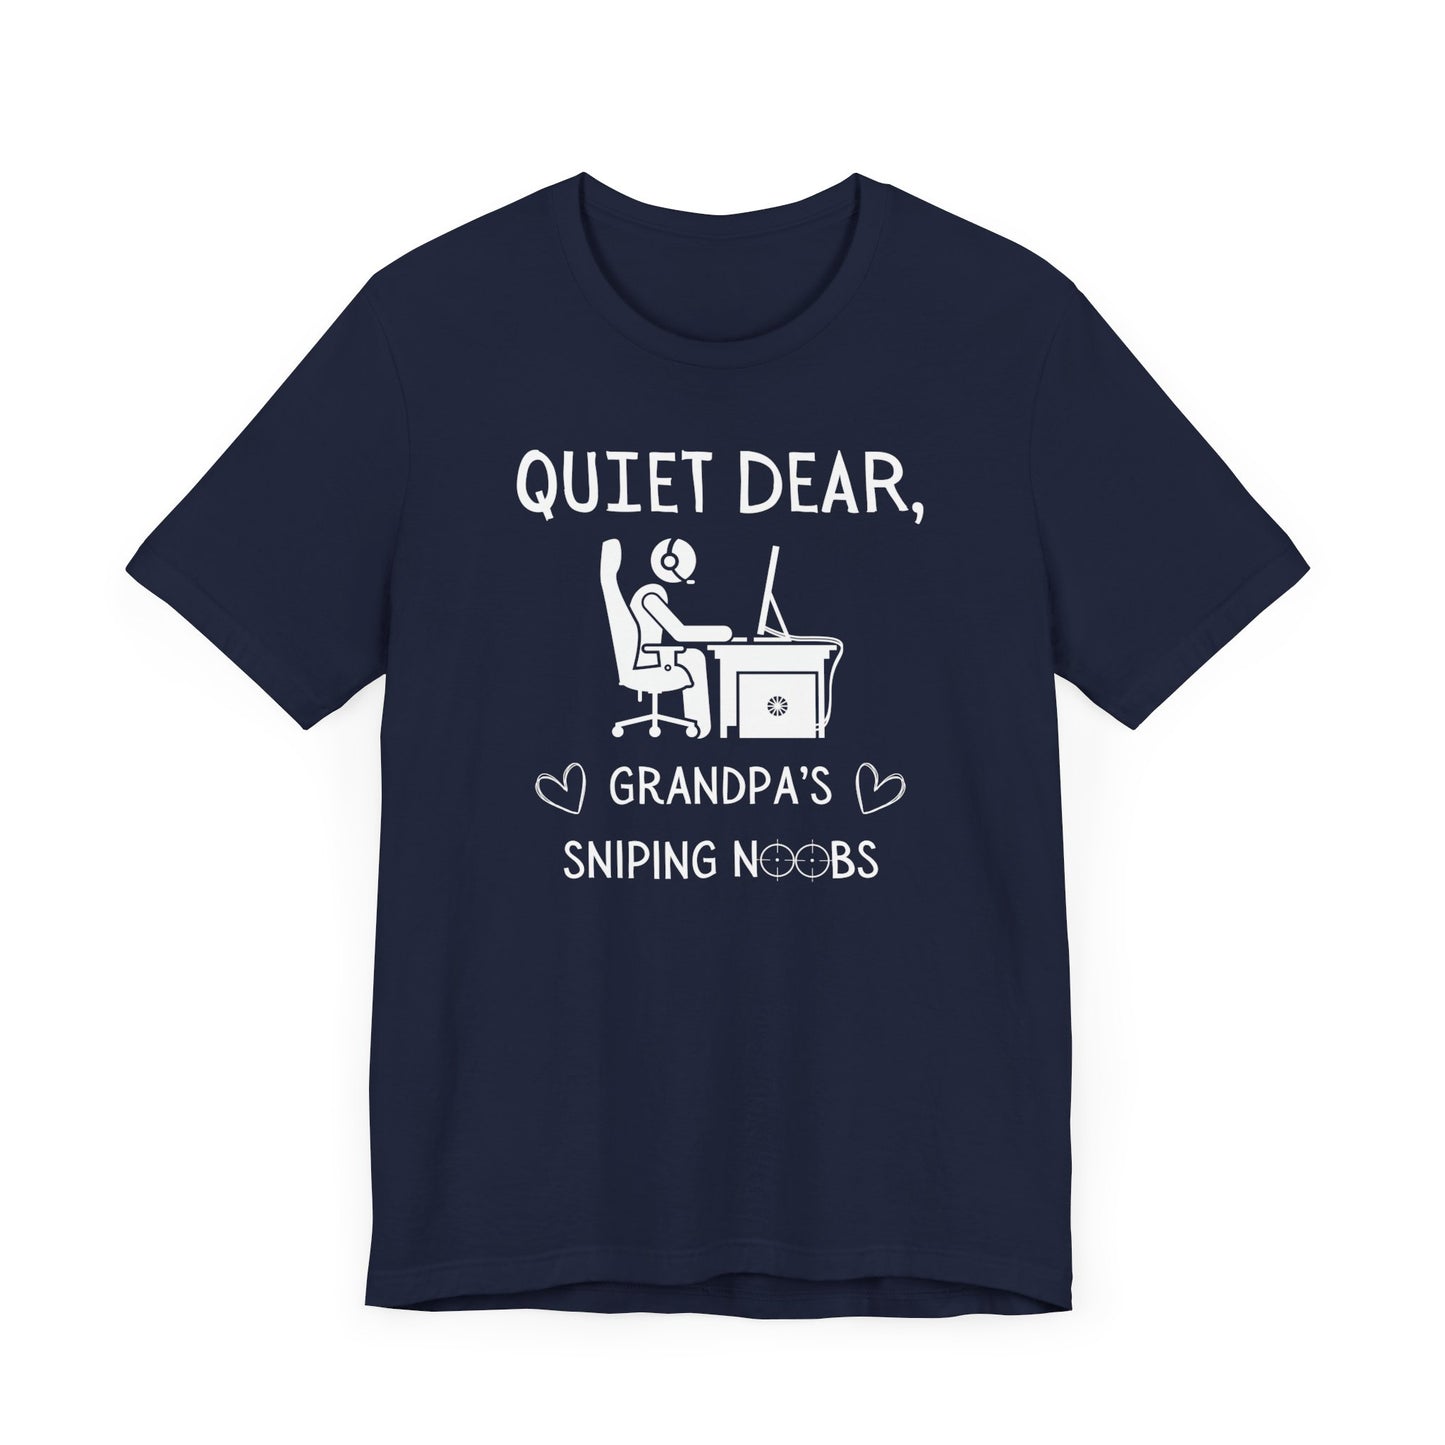 A flat image of a navy t-shirt that reads Quiet Dear, Grandpa's Sniping Noobs in white text. The lower text is framed by two hearts, and the O's are in the shape of sniper scopes. In the center of the shirt is an image of a person at a desk with a gaming PC.